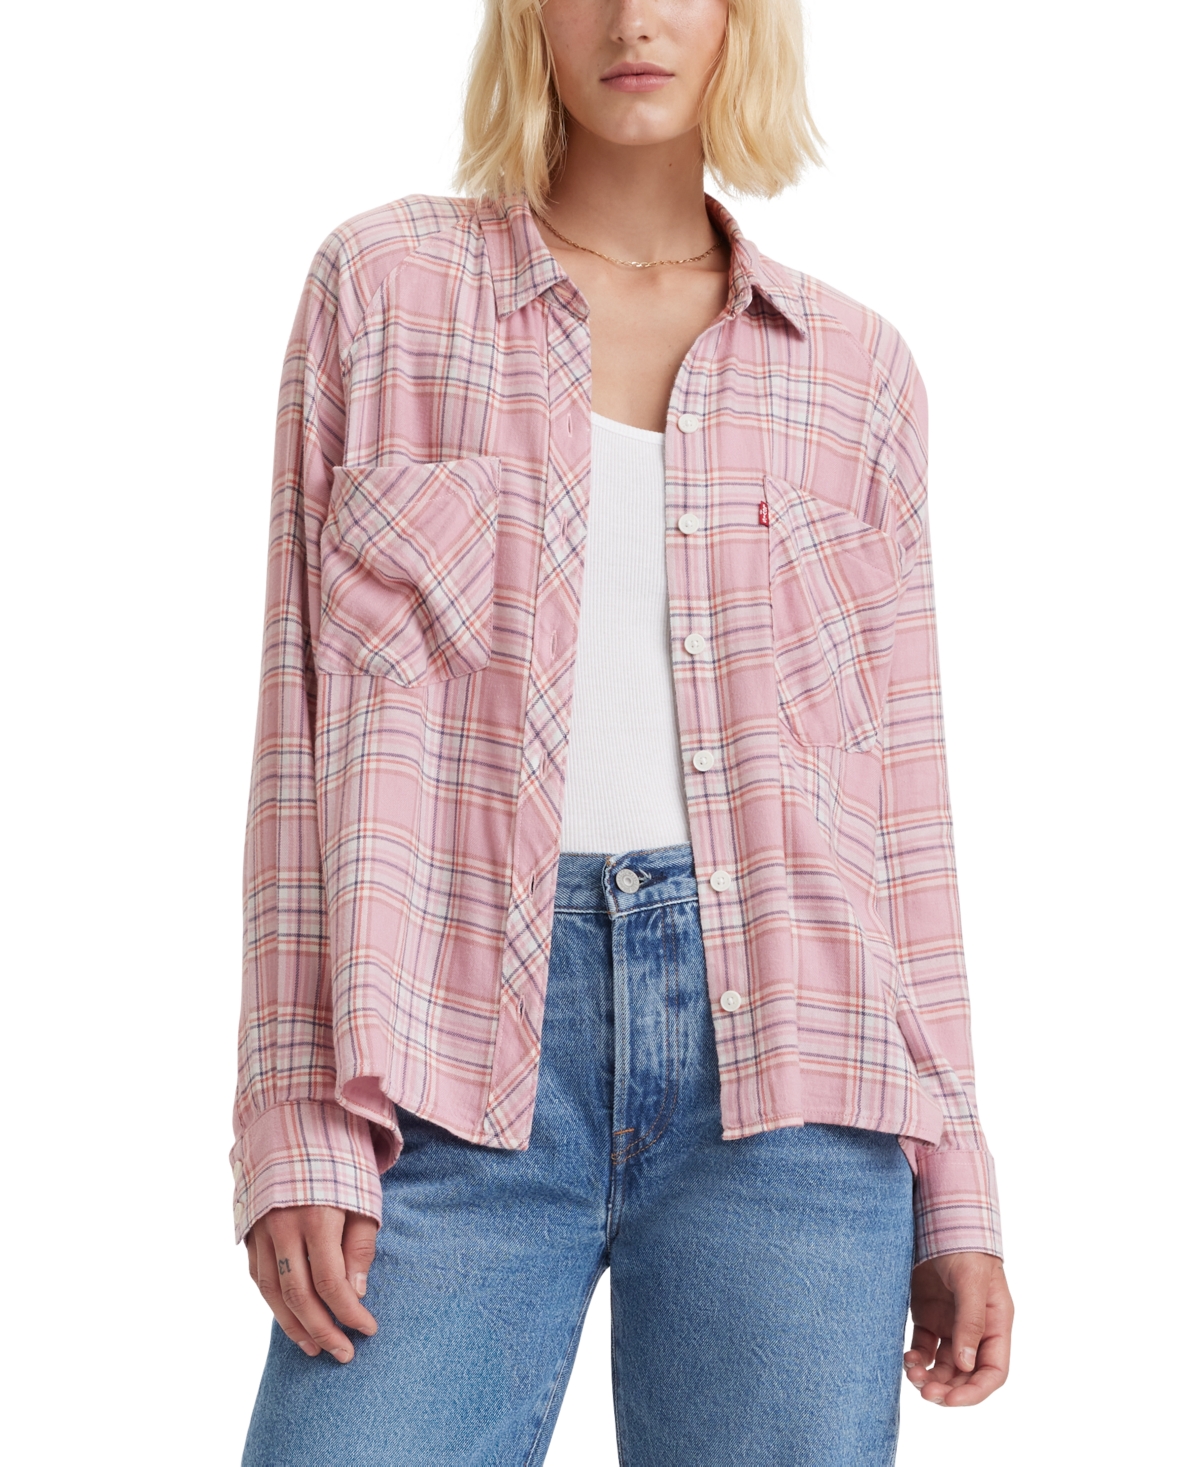 Levi's Women's Lainey Printed Cotton Button-front Top In Clayton Plaid Keepsake Lilac